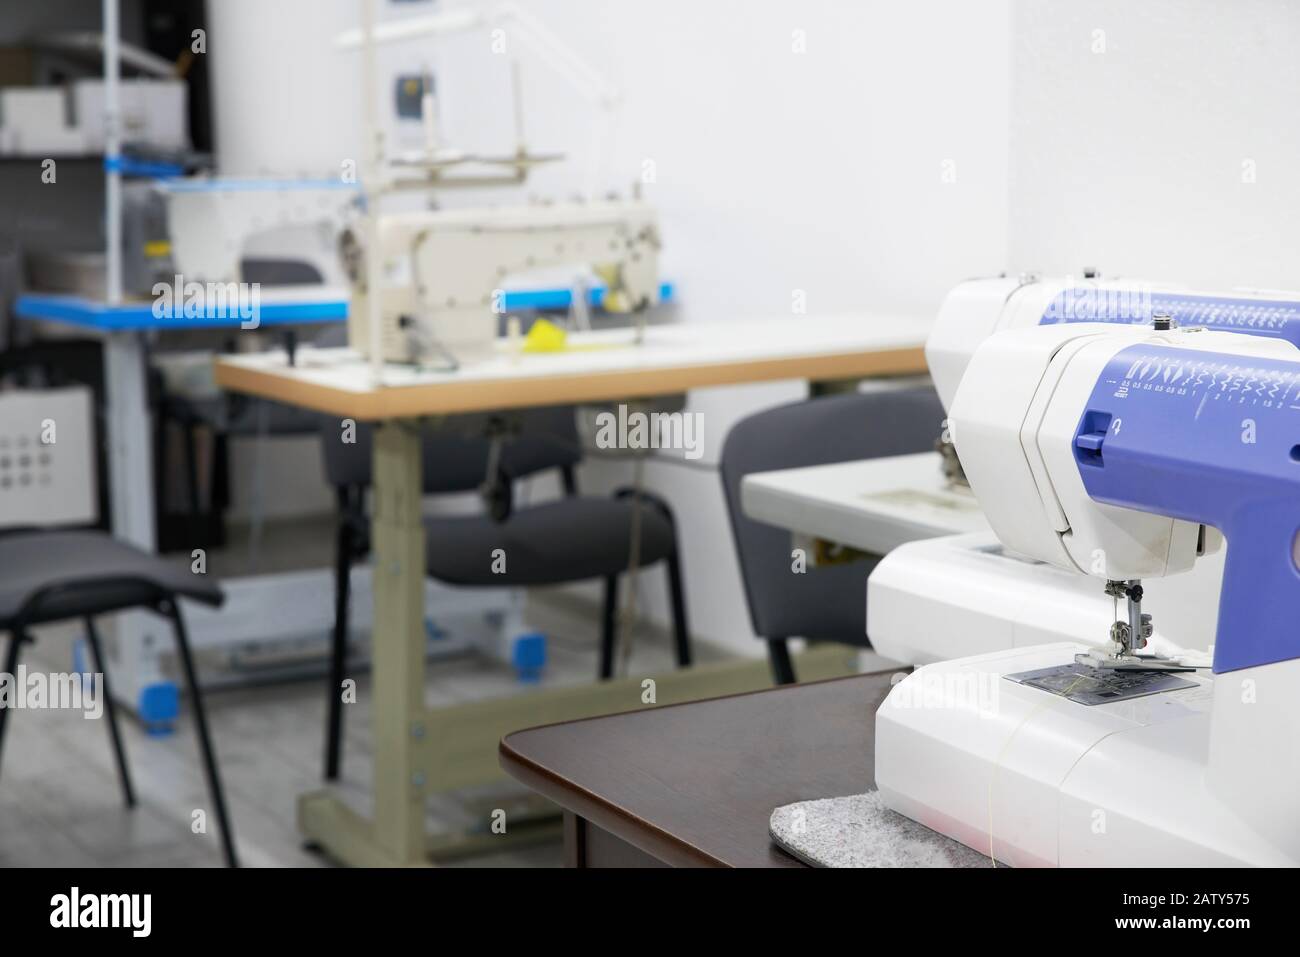 Row of sewing machines in empty atelier studio or tailor shop Stock Photo